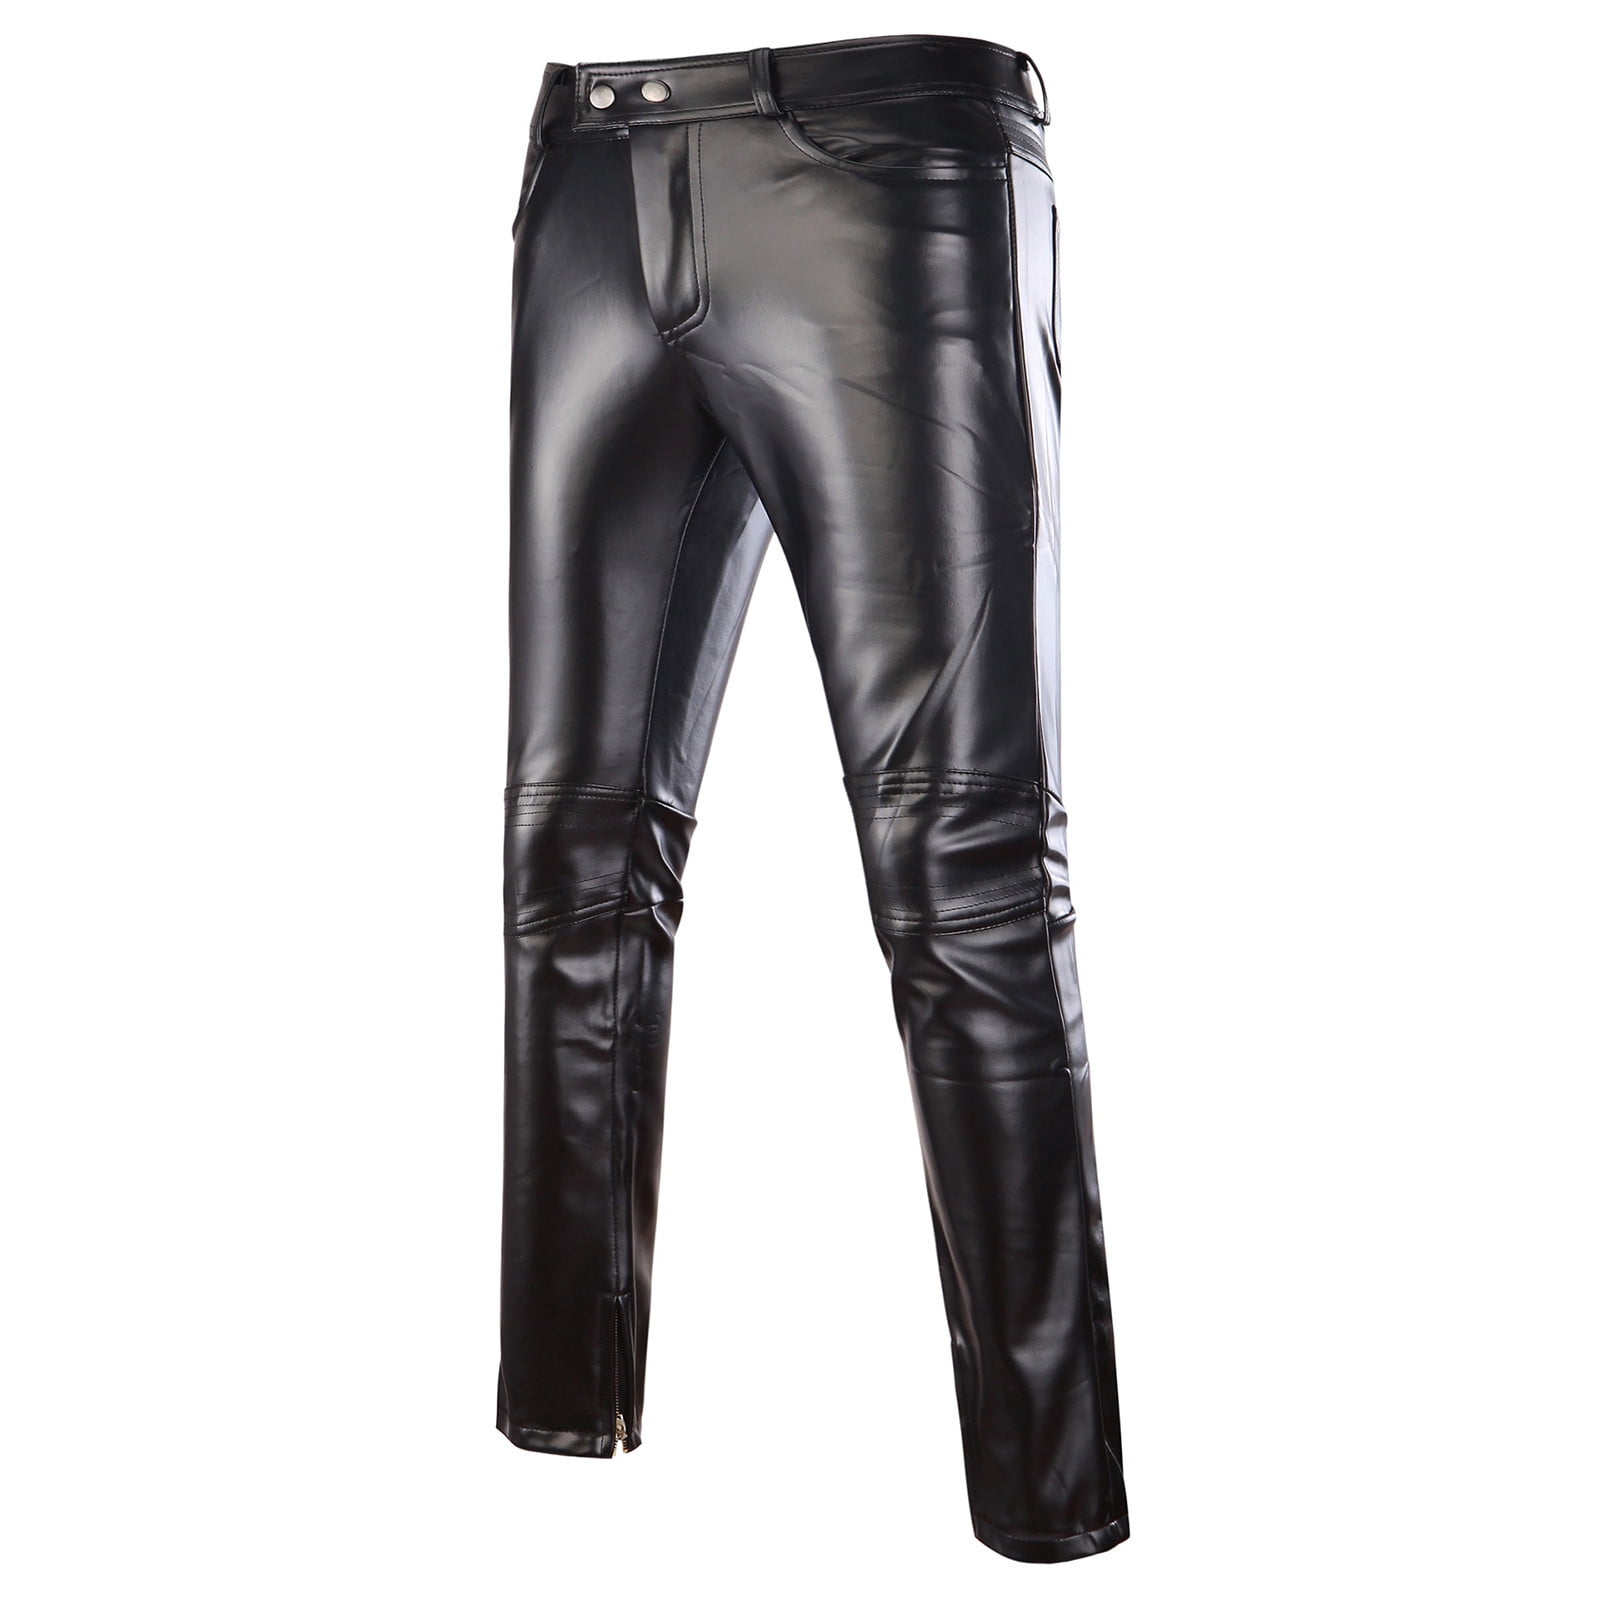 Kayannuo Red leather Pants Spring Clearance Men's New Casual